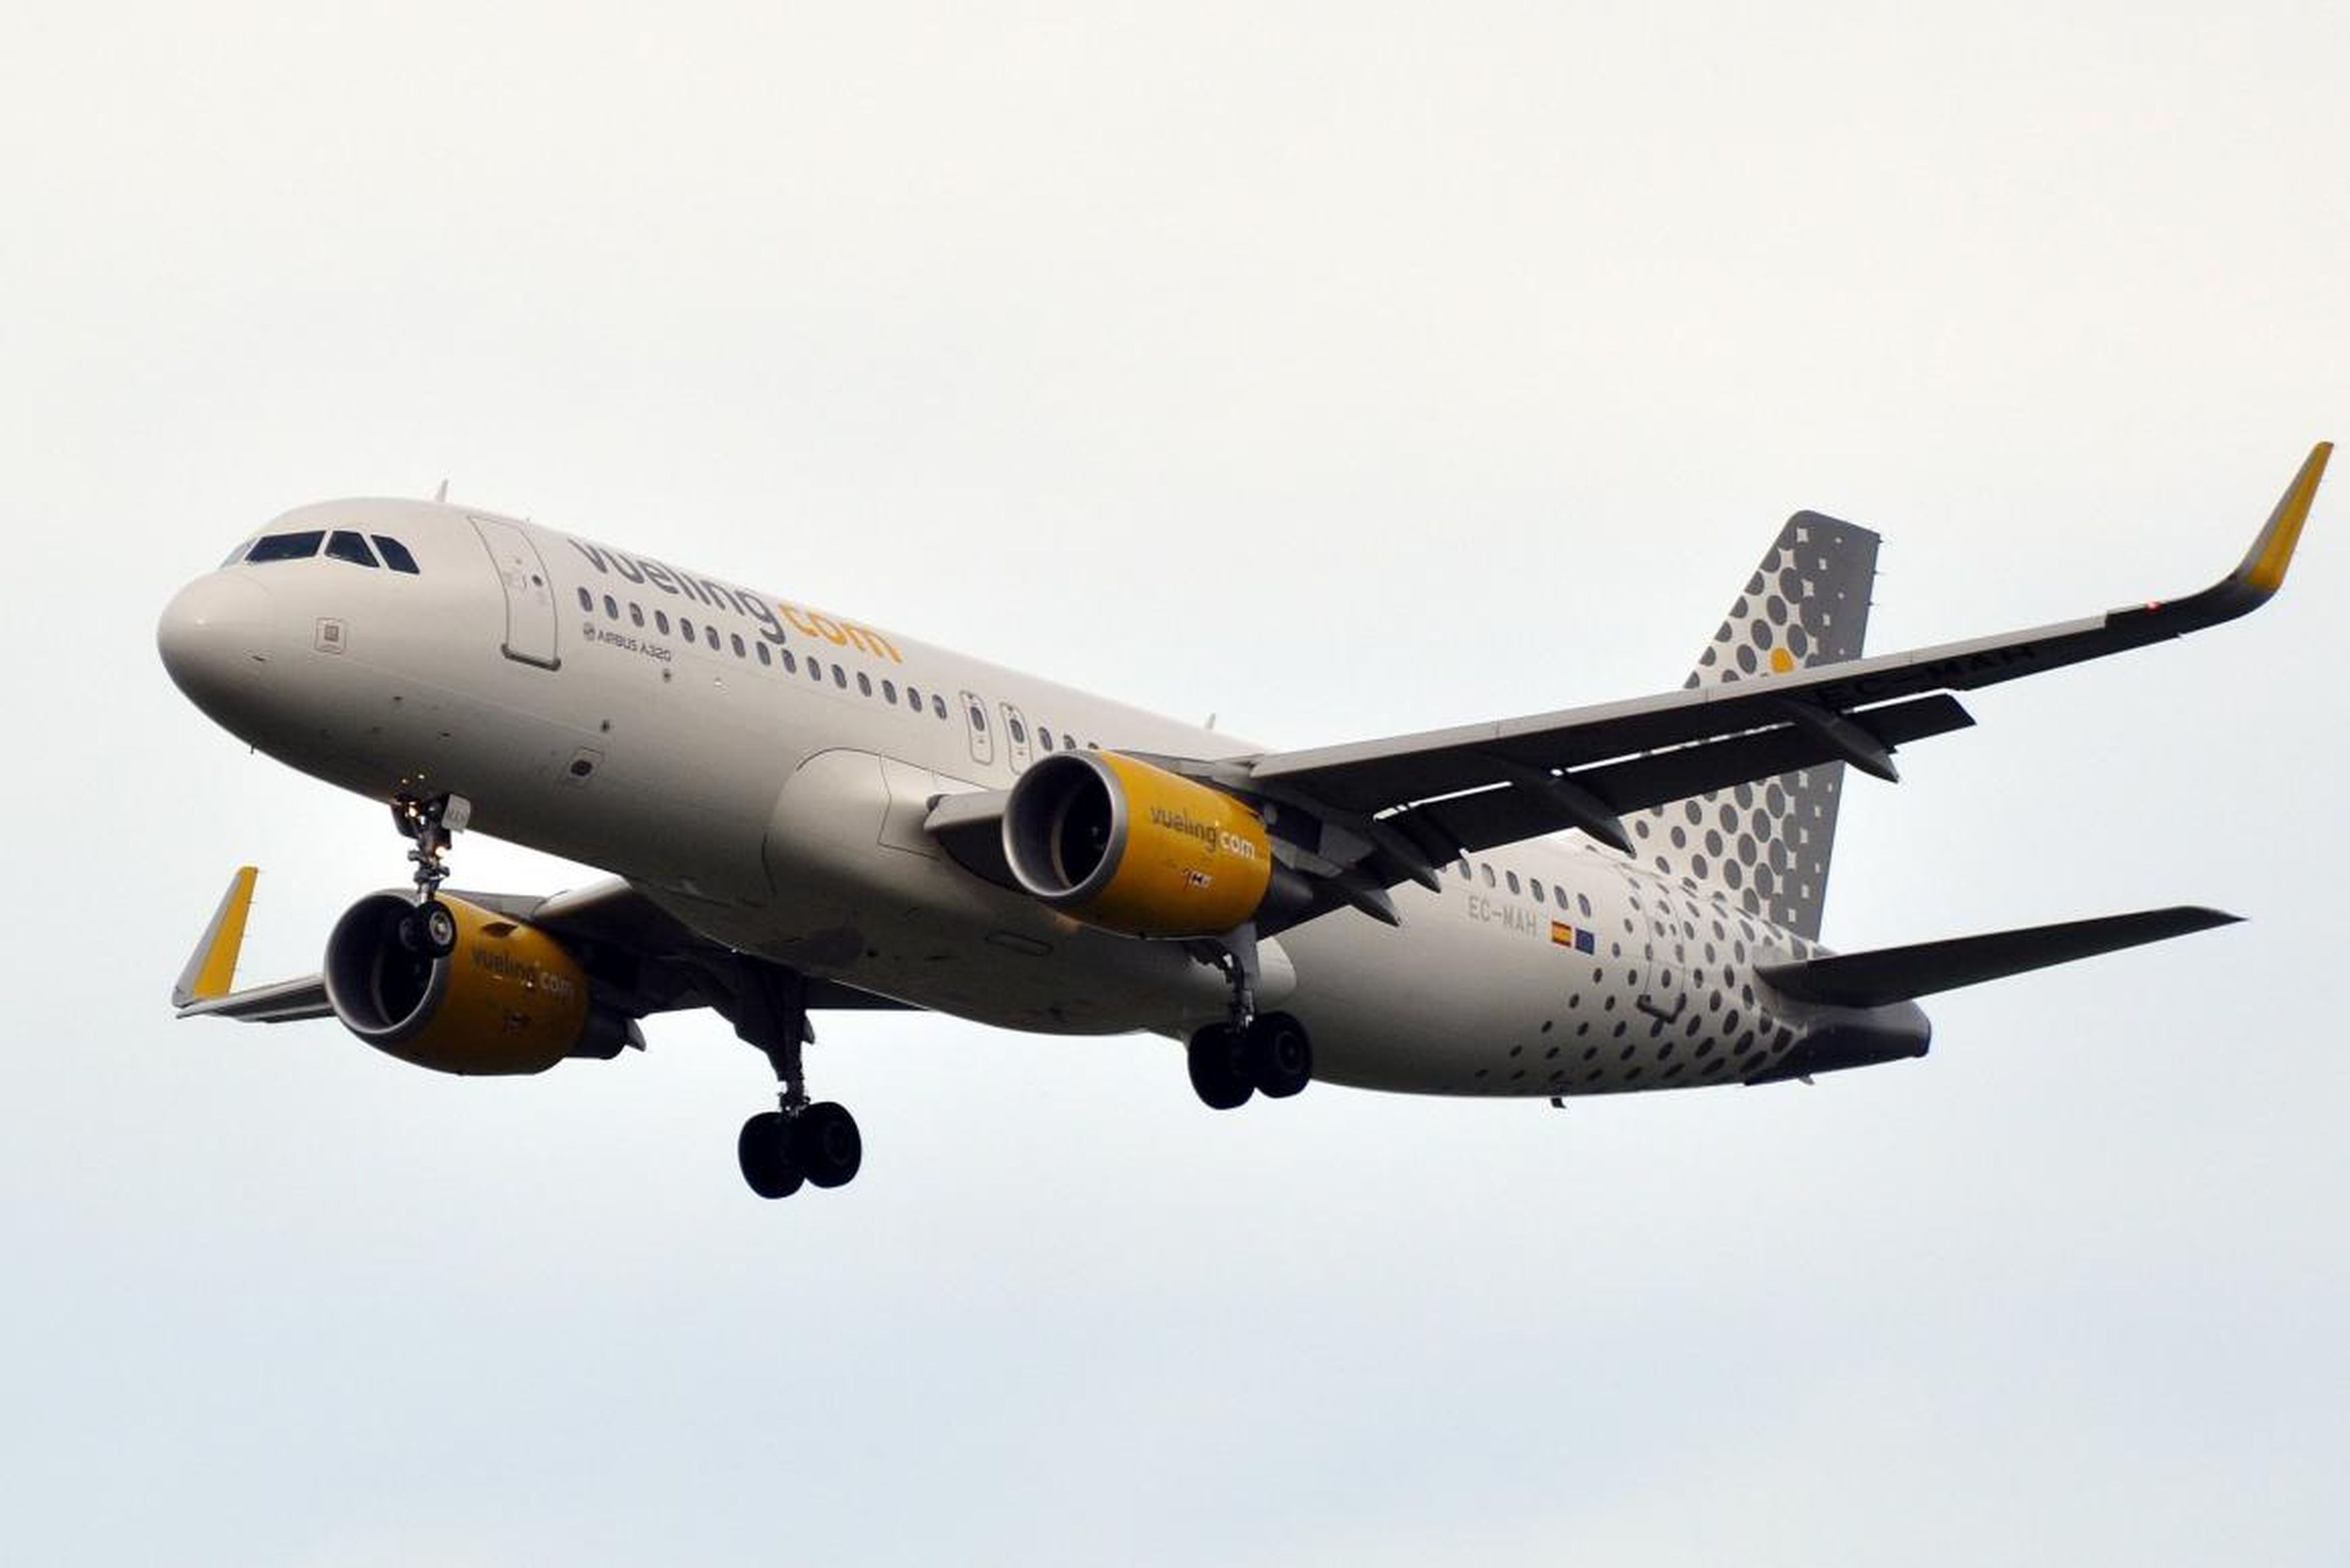 15. Vueling Airlines